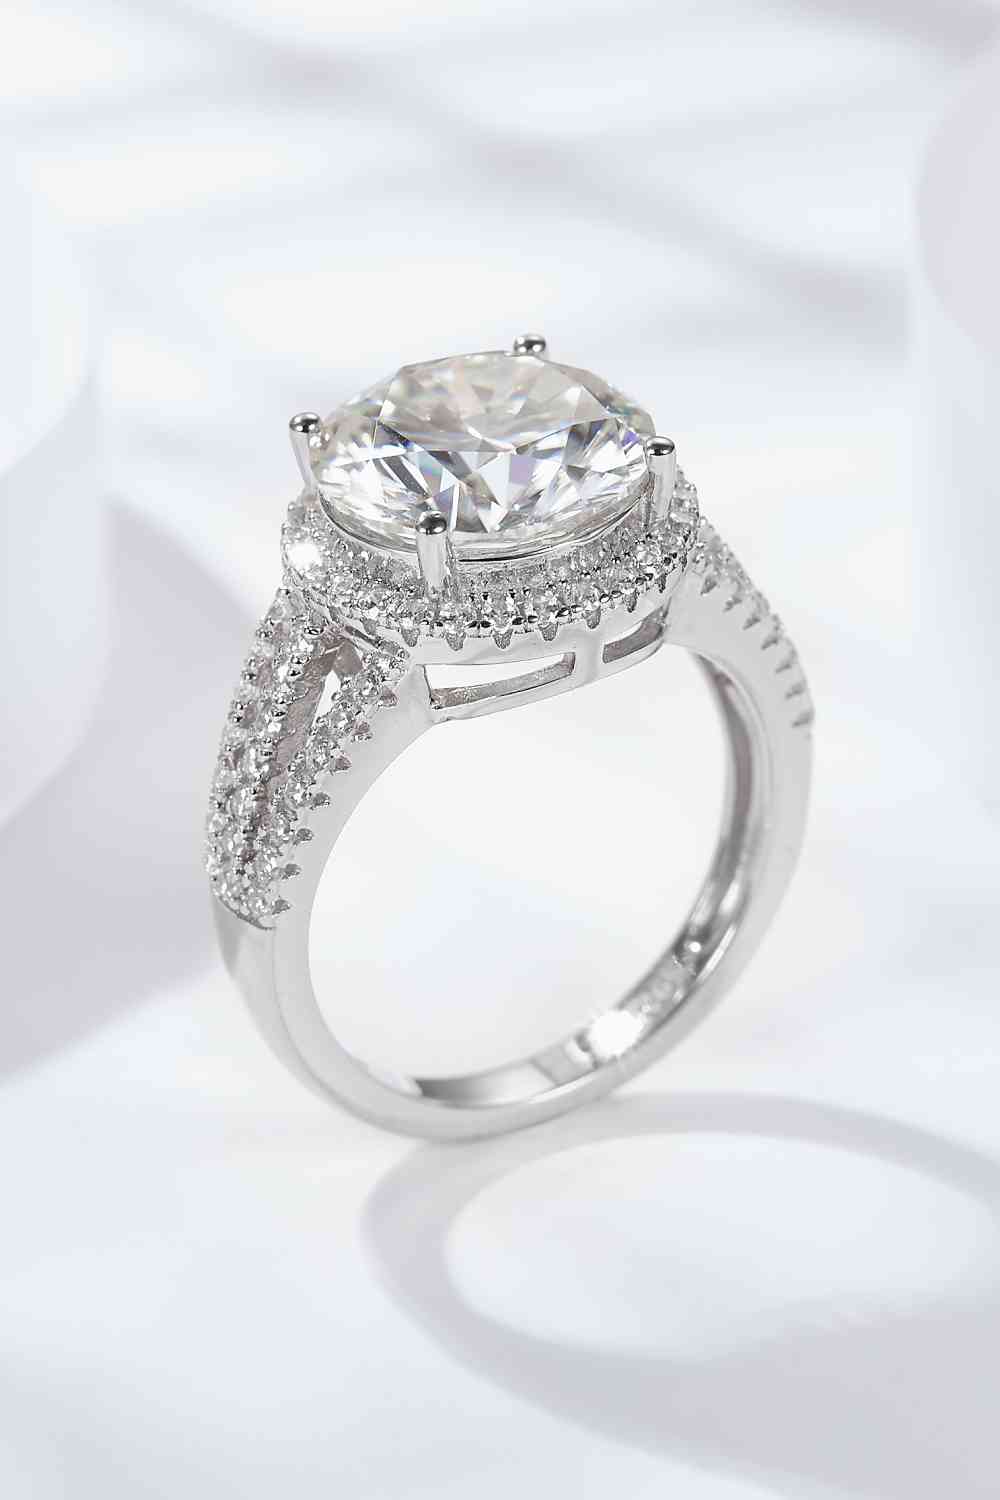 a white gold ring with a cushion cut diamond surrounded by pave diamonds